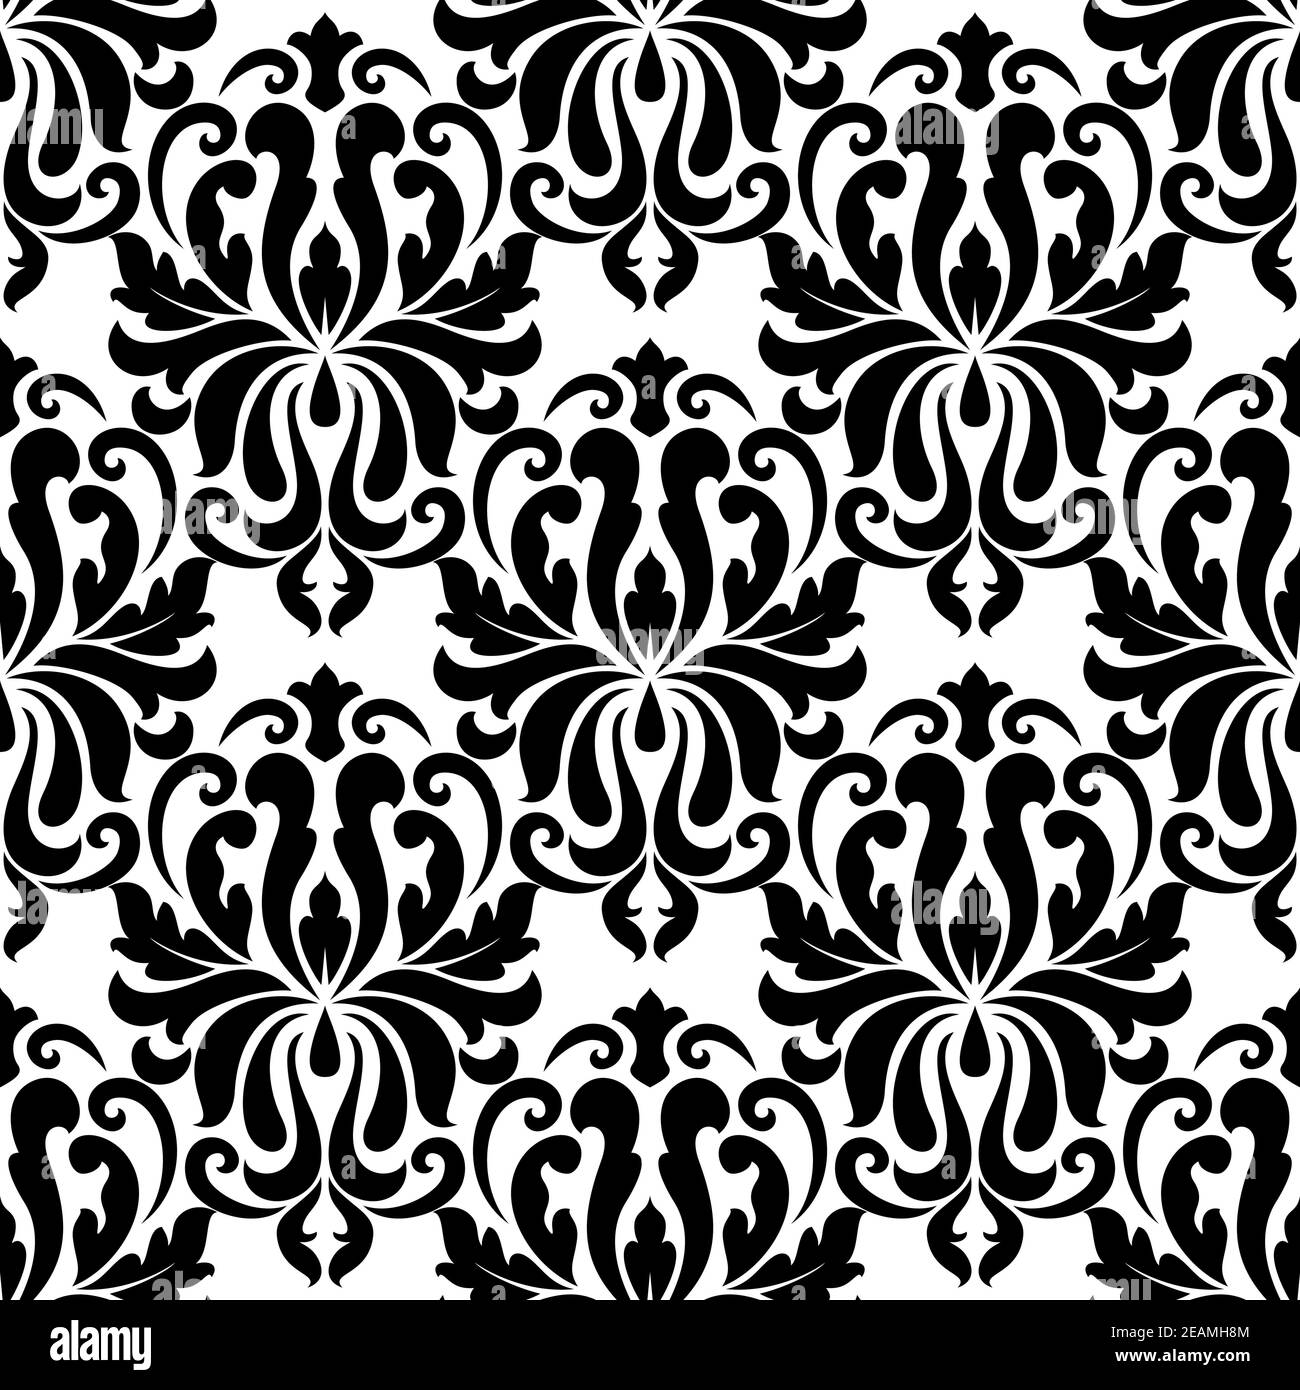 Seamless bold black colored floral arabesque pattern in damask style motifs suitable for wallpaper, tiles and fabric design isolated over white colore Stock Vector